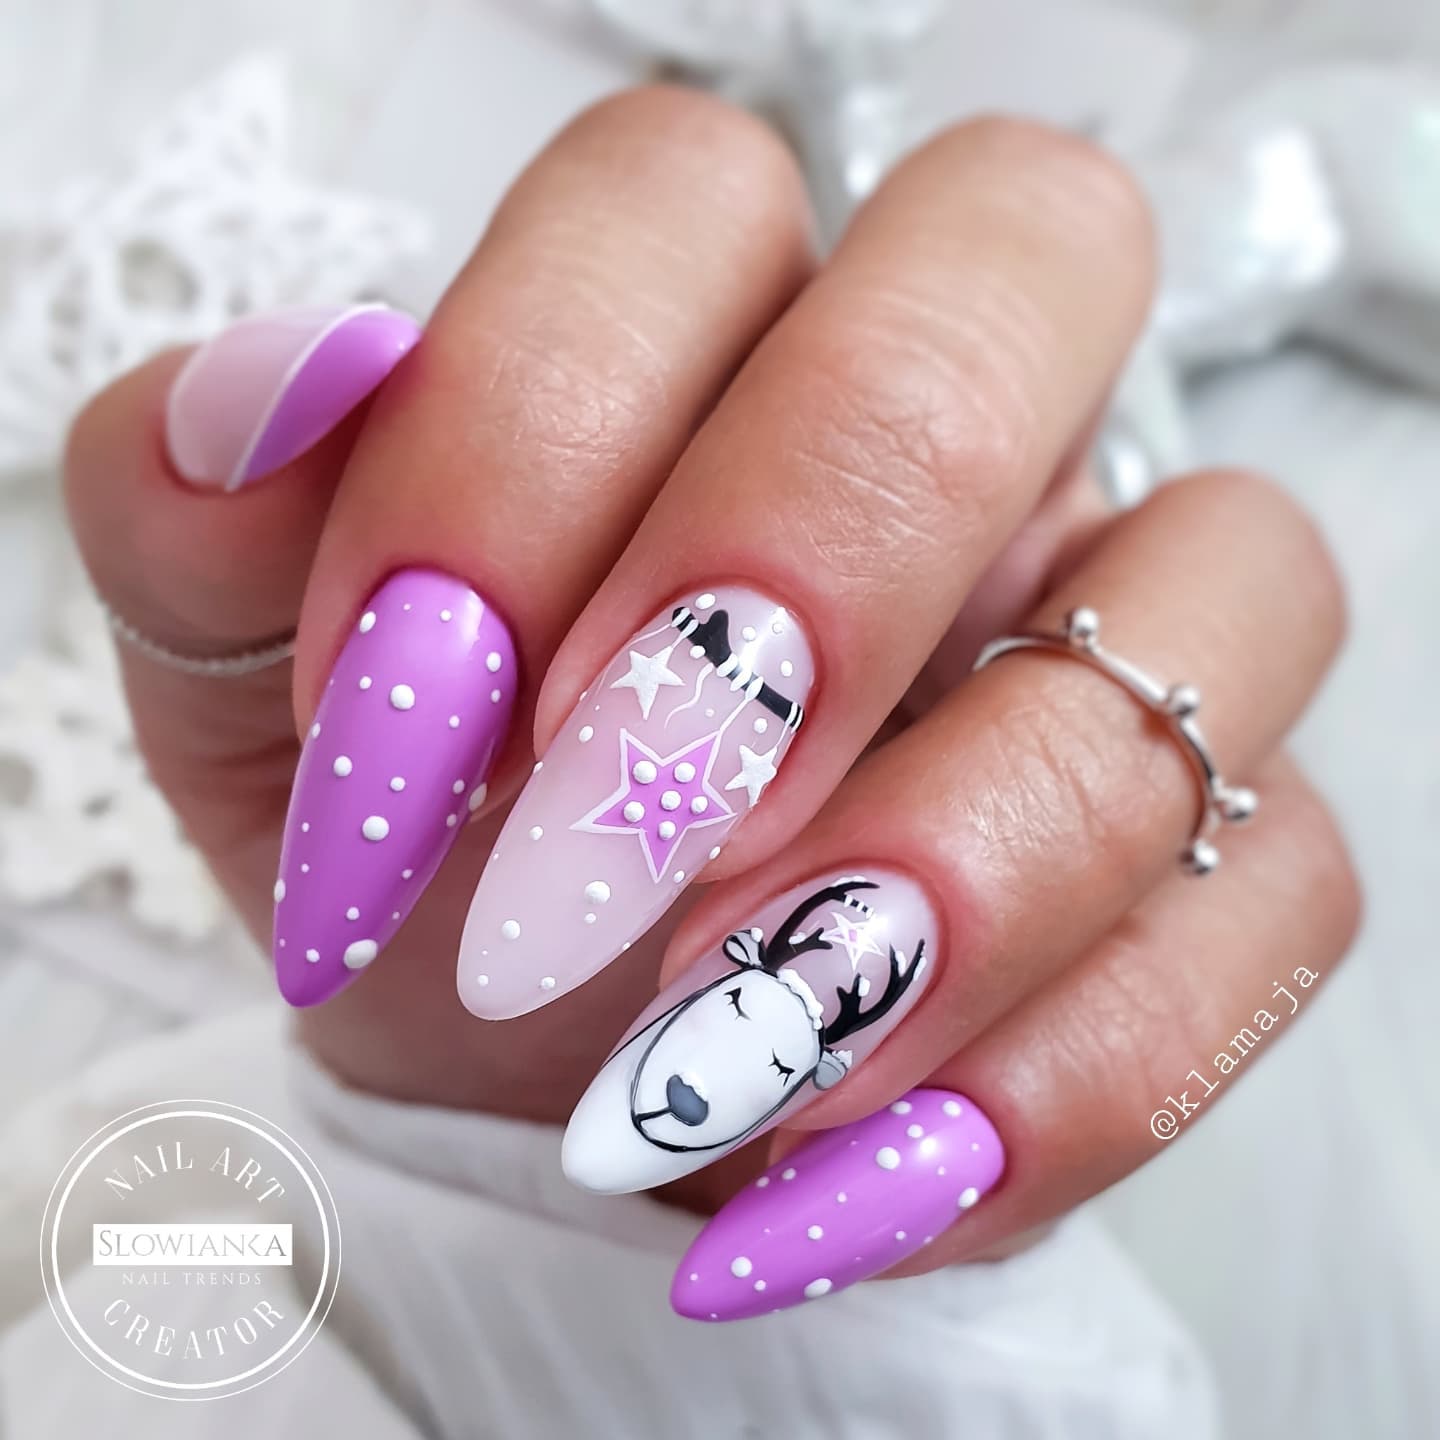 Long Purple Nails with Reindeer Design